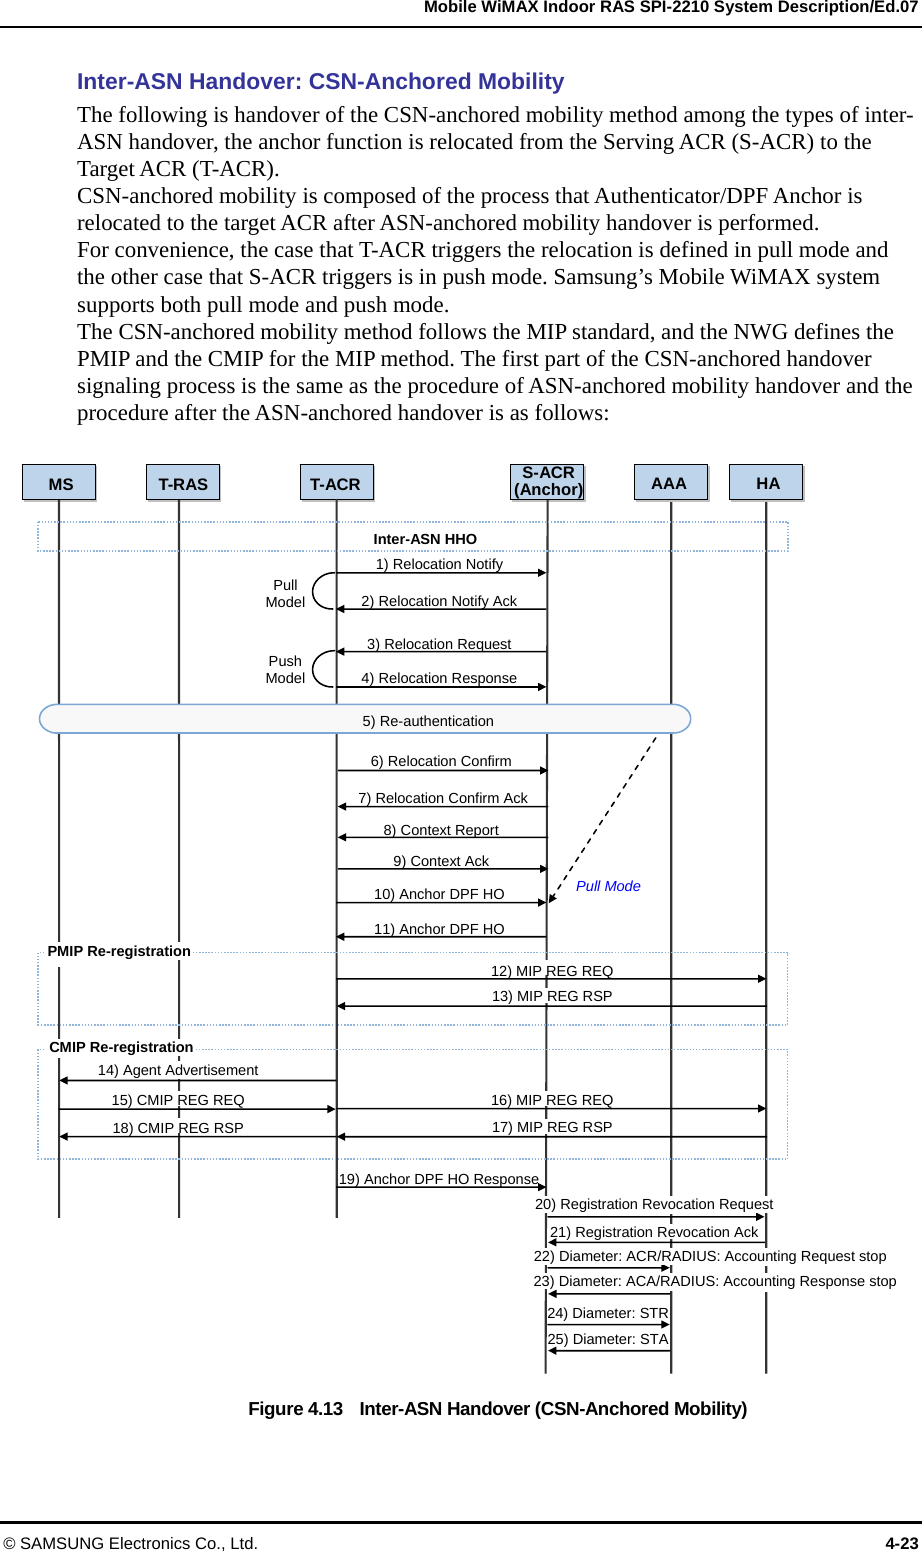   Mobile WiMAX Indoor RAS SPI-2210 System Description/Ed.07 © SAMSUNG Electronics Co., Ltd.  4-23 Inter-ASN Handover: CSN-Anchored Mobility The following is handover of the CSN-anchored mobility method among the types of inter-ASN handover, the anchor function is relocated from the Serving ACR (S-ACR) to the Target ACR (T-ACR).   CSN-anchored mobility is composed of the process that Authenticator/DPF Anchor is relocated to the target ACR after ASN-anchored mobility handover is performed.   For convenience, the case that T-ACR triggers the relocation is defined in pull mode and the other case that S-ACR triggers is in push mode. Samsung’s Mobile WiMAX system supports both pull mode and push mode.   The CSN-anchored mobility method follows the MIP standard, and the NWG defines the PMIP and the CMIP for the MIP method. The first part of the CSN-anchored handover signaling process is the same as the procedure of ASN-anchored mobility handover and the procedure after the ASN-anchored handover is as follows:  Figure 4.13    Inter-ASN Handover (CSN-Anchored Mobility)   MS T-RAST-ACR S-ACR(Anchor)Inter-ASN HHO 1) Relocation Notify 2) Relocation Notify Ack3) Relocation Request4) Relocation ResponsePull Model Push Model 10) Anchor DPF HO 11) Anchor DPF HO 12) MIP REG REQ 13) MIP REG RSP 16) MIP REG REQ 17) MIP REG RSP 14) Agent Advertisement 15) CMIP REG REQ 18) CMIP REG RSP 19) Anchor DPF HO Response24) Diameter: STR 25) Diameter: STA Pull Mode 5) Re-authentication 21) Registration Revocation Ack 6) Relocation Confirm7) Relocation Confirm Ack 8) Context Report 9) Context Ack HA AAA 22) Diameter: ACR/RADIUS: Accounting Request stop23) Diameter: ACA/RADIUS: Accounting Response stop PMIP Re-registration CMIP Re-registration20) Registration Revocation Request  